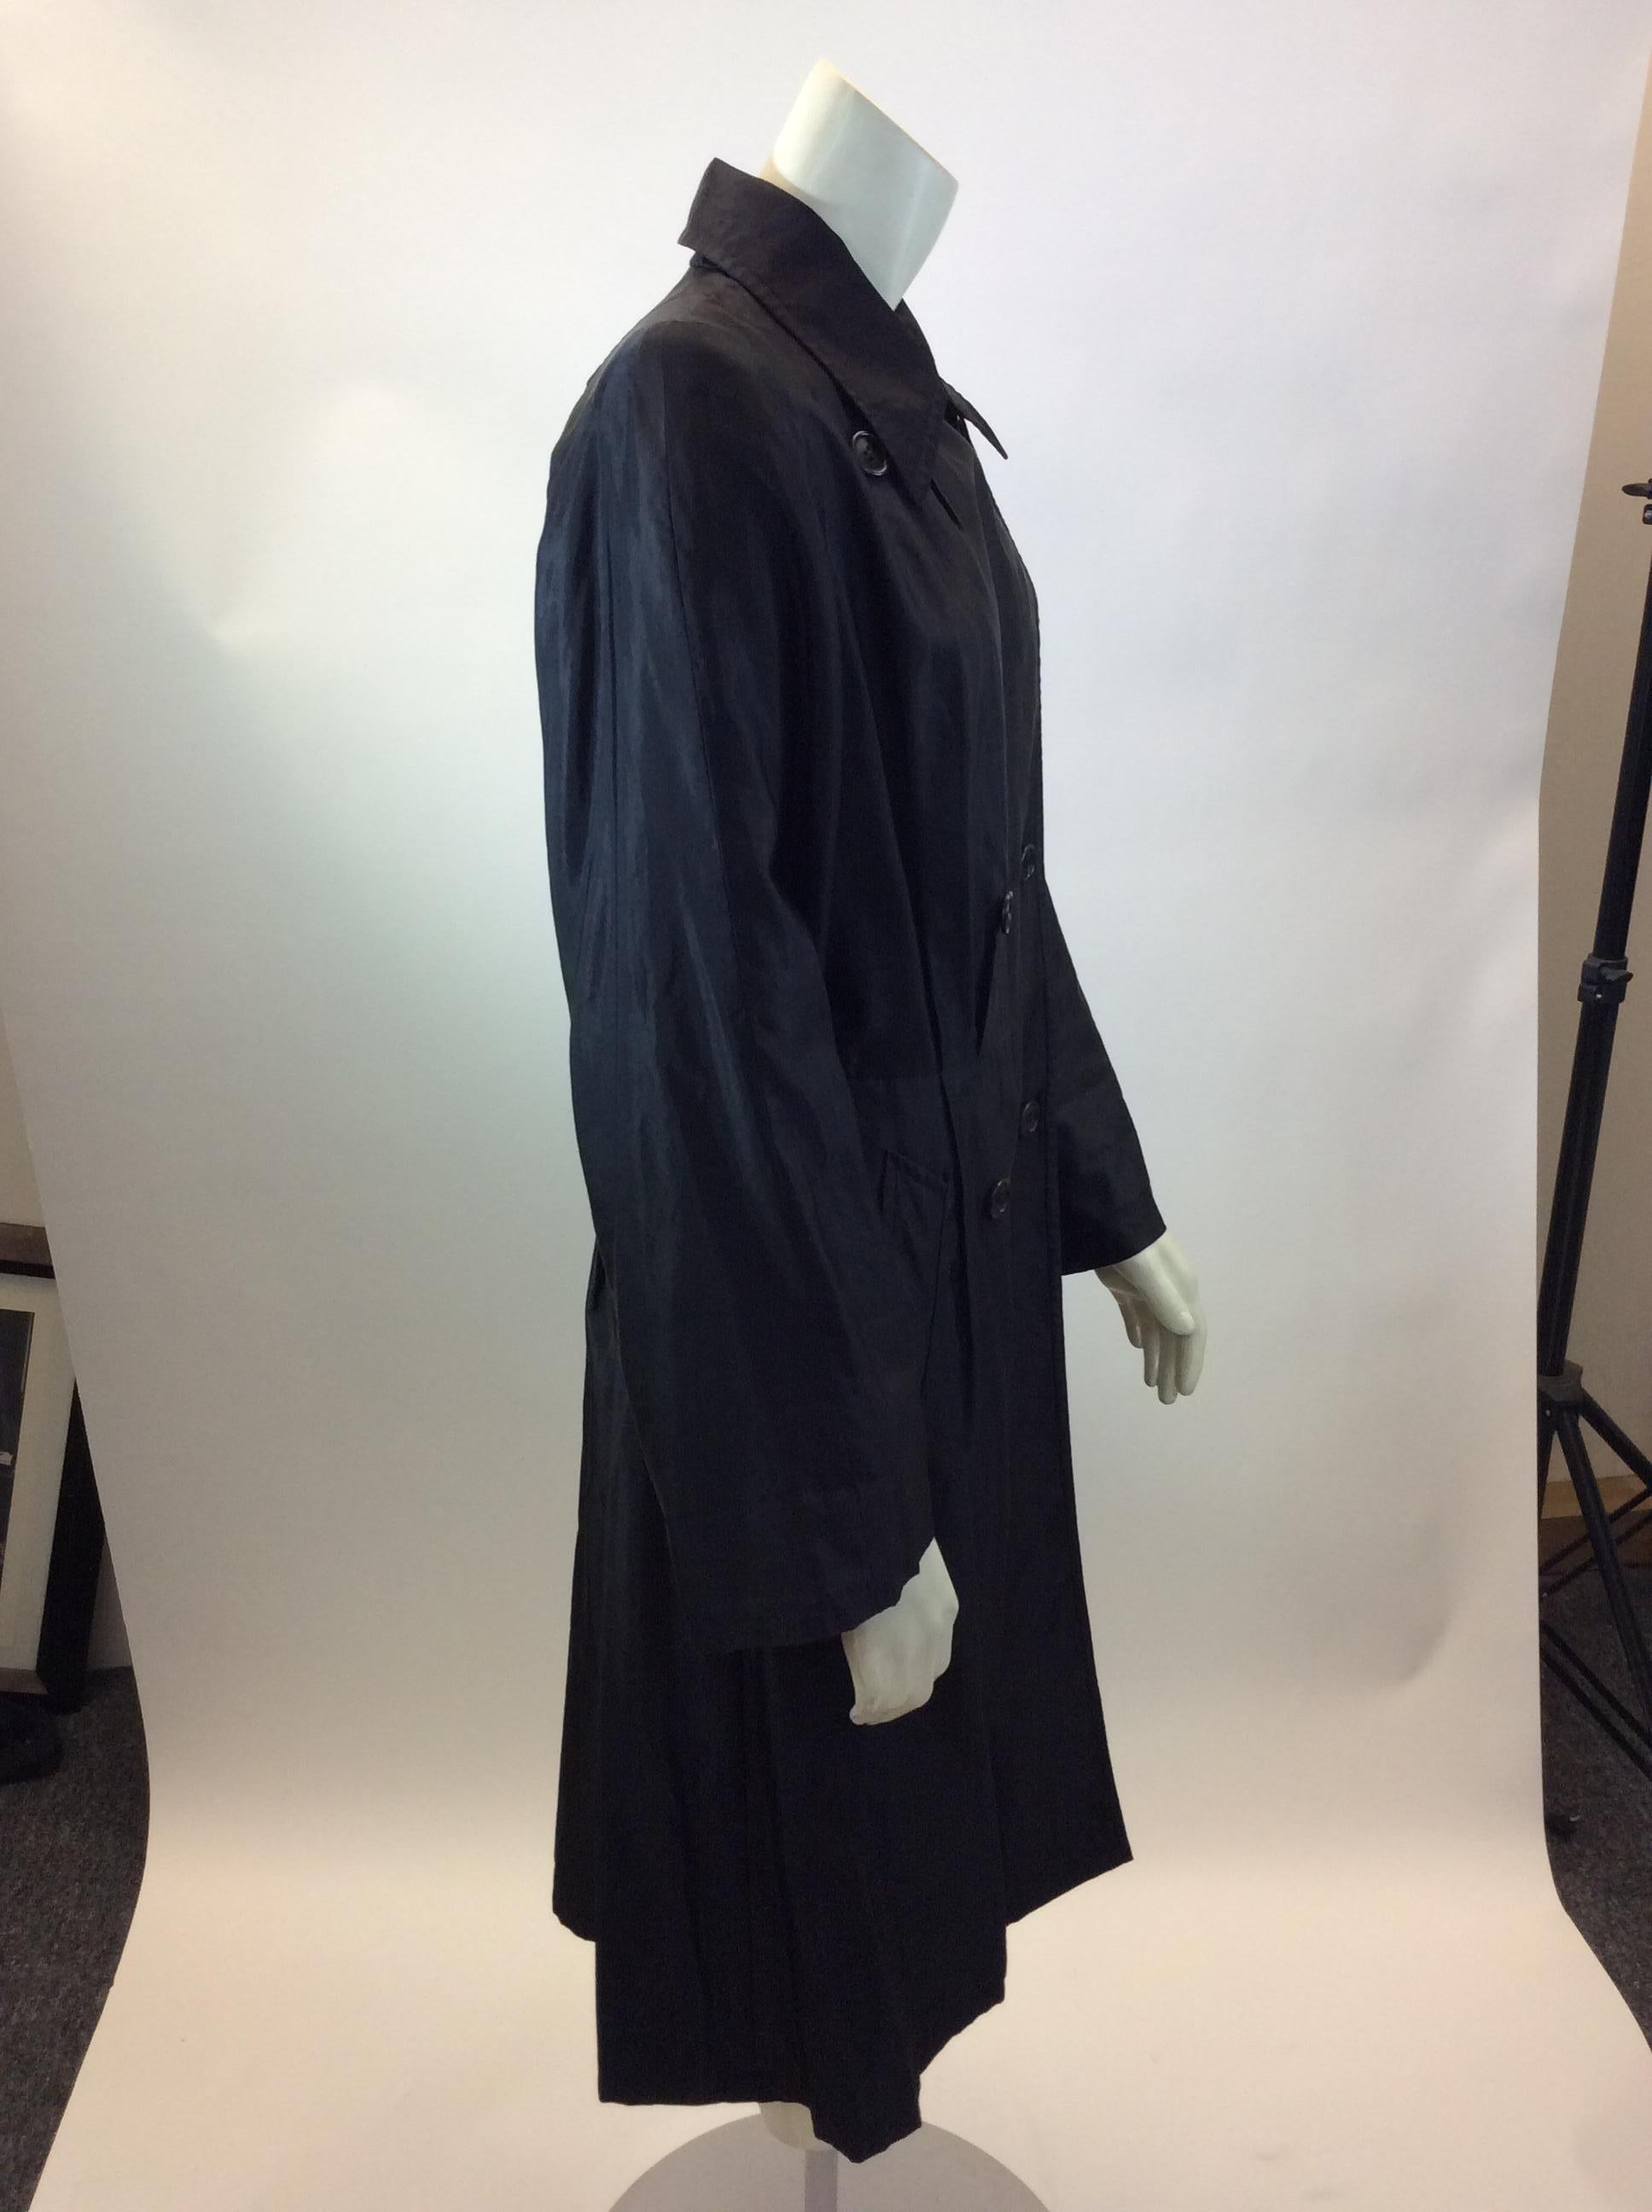 Dries Van Noten Black Trench Coat In Good Condition For Sale In Narberth, PA